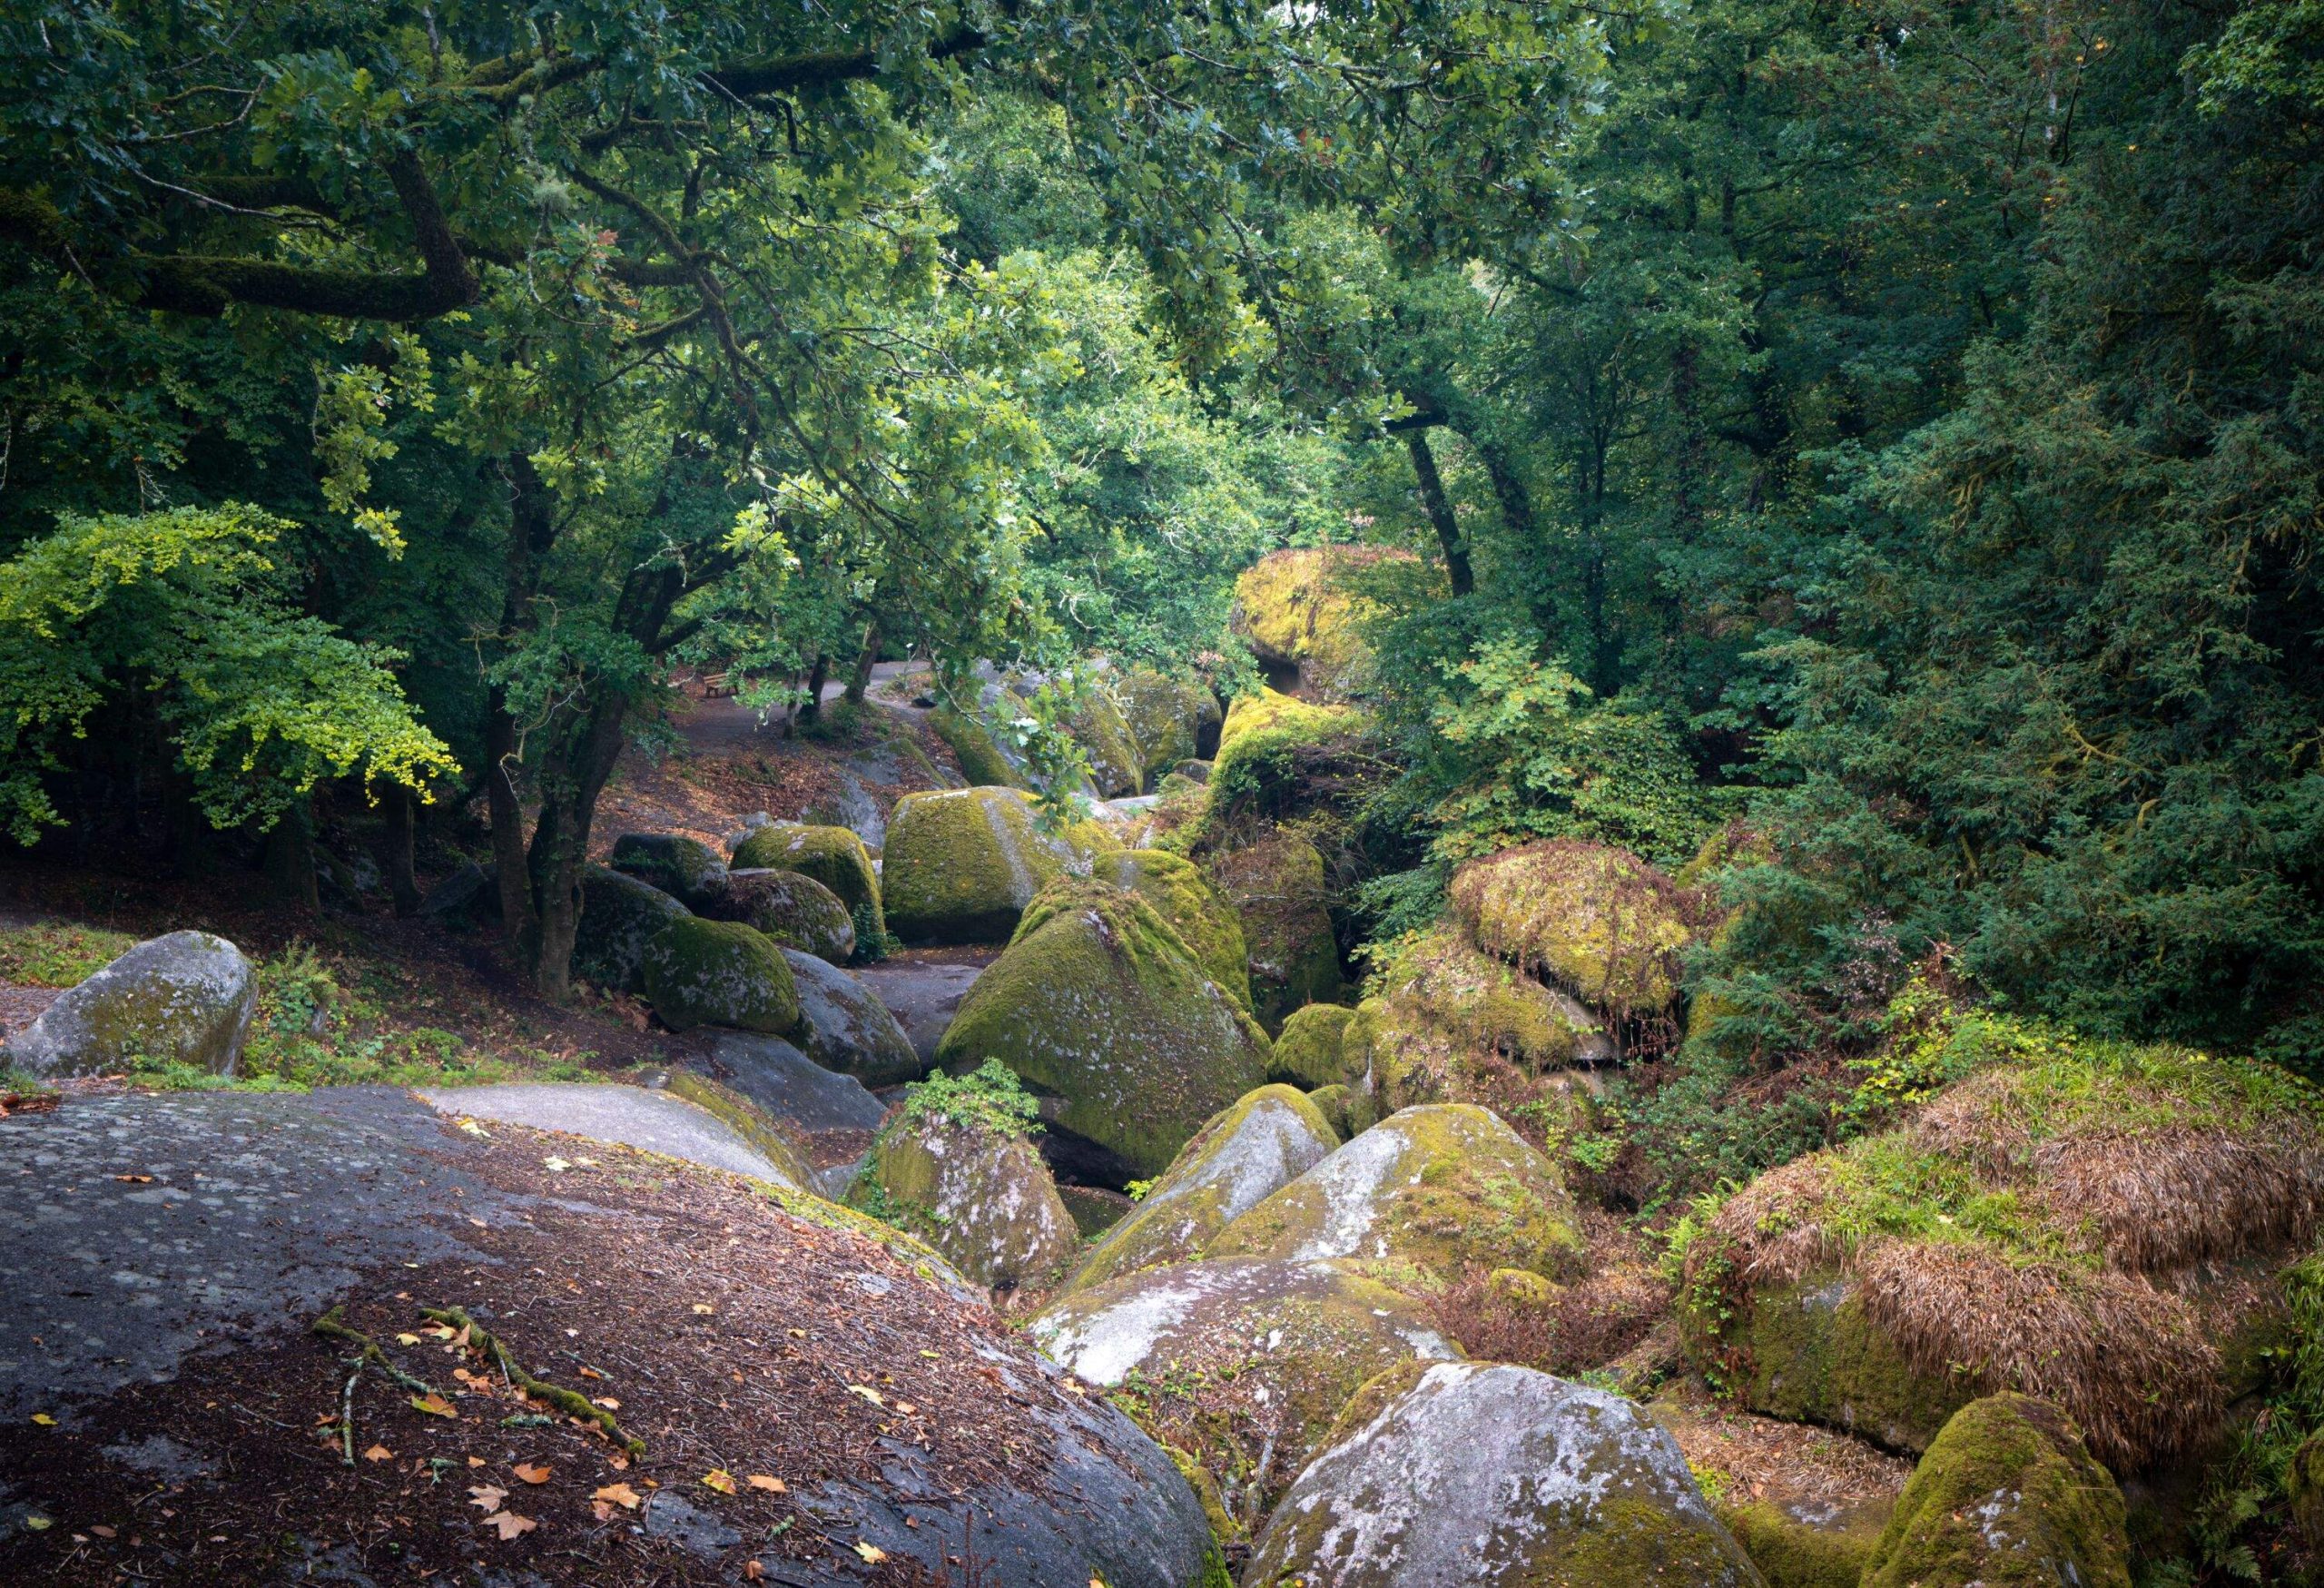 This image was taken in Huelgoat forest , Monts d'Arrée, Finistère, Bretagne.You can see the 